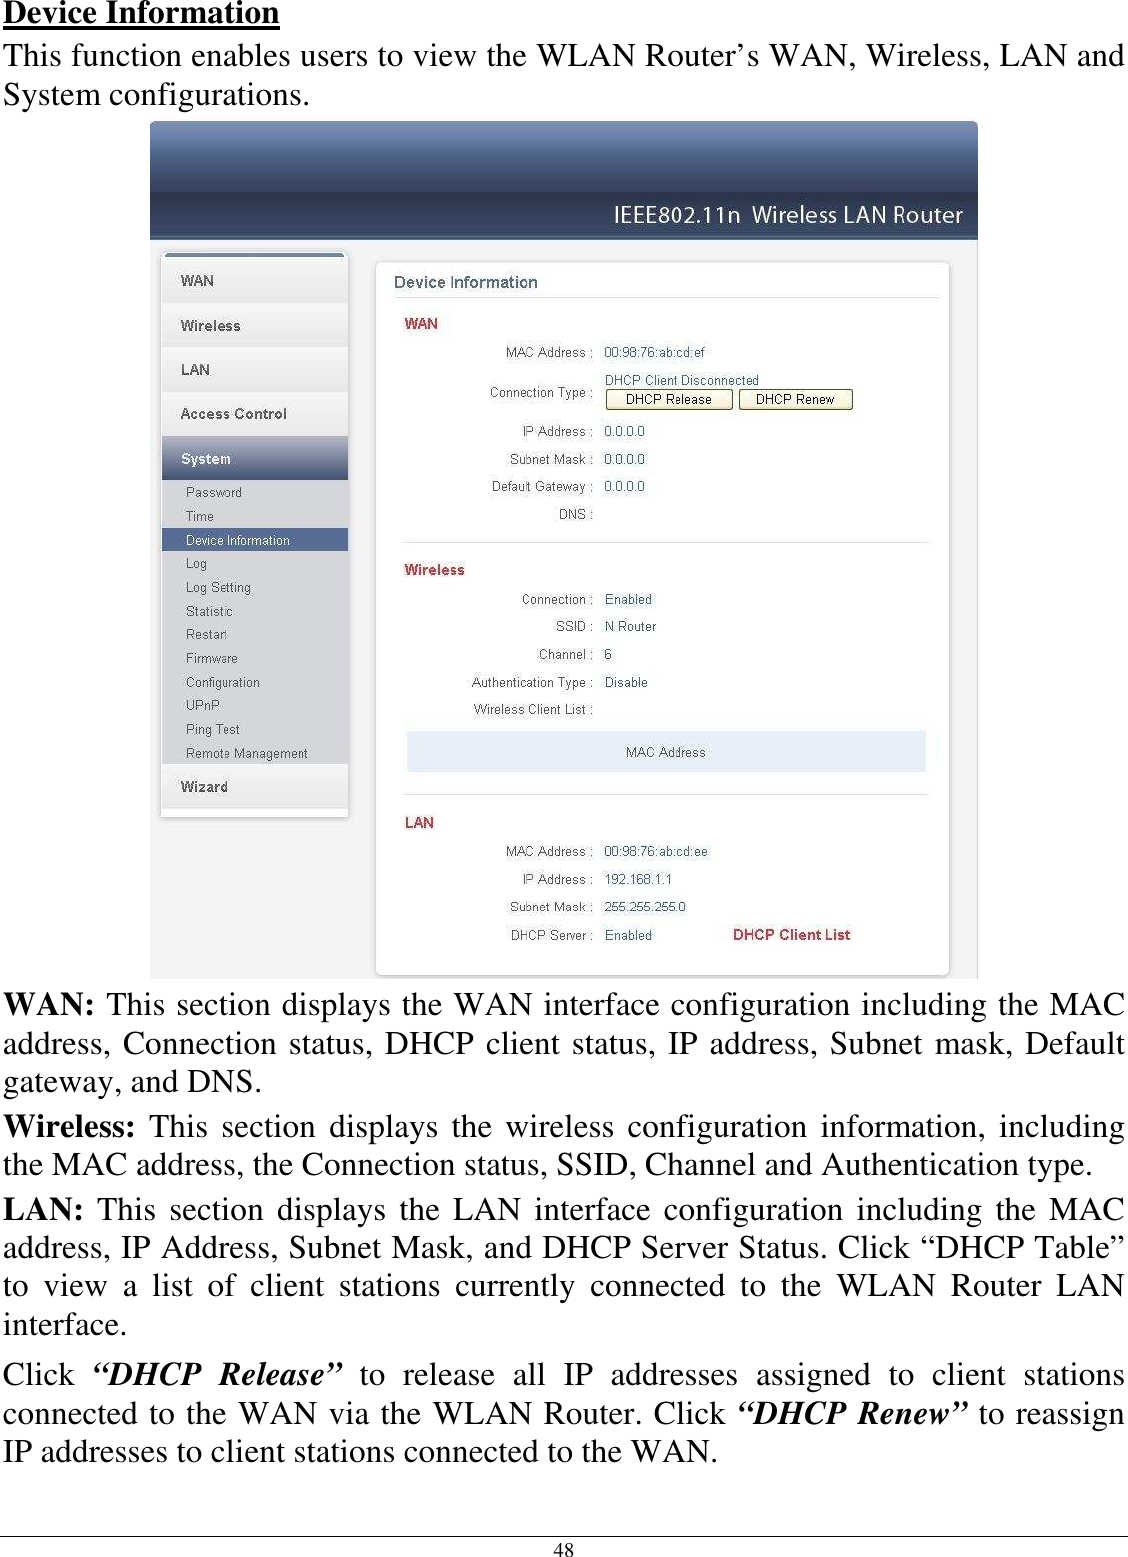 48 Device Information This function enables users to view the WLAN Router’s WAN, Wireless, LAN and System configurations.  WAN: This section displays the WAN interface configuration including the MAC address, Connection status, DHCP client status, IP address, Subnet mask, Default gateway, and DNS.  Wireless:  This section  displays the  wireless configuration  information,  including the MAC address, the Connection status, SSID, Channel and Authentication type. LAN: This section displays the LAN interface  configuration including  the MAC address, IP Address, Subnet Mask, and DHCP Server Status. Click “DHCP Table” to  view  a  list  of  client  stations  currently  connected  to  the  WLAN  Router  LAN interface. Click  “DHCP  Release”  to  release  all  IP  addresses  assigned  to  client  stations connected to the WAN via the WLAN Router. Click “DHCP Renew” to reassign IP addresses to client stations connected to the WAN. 